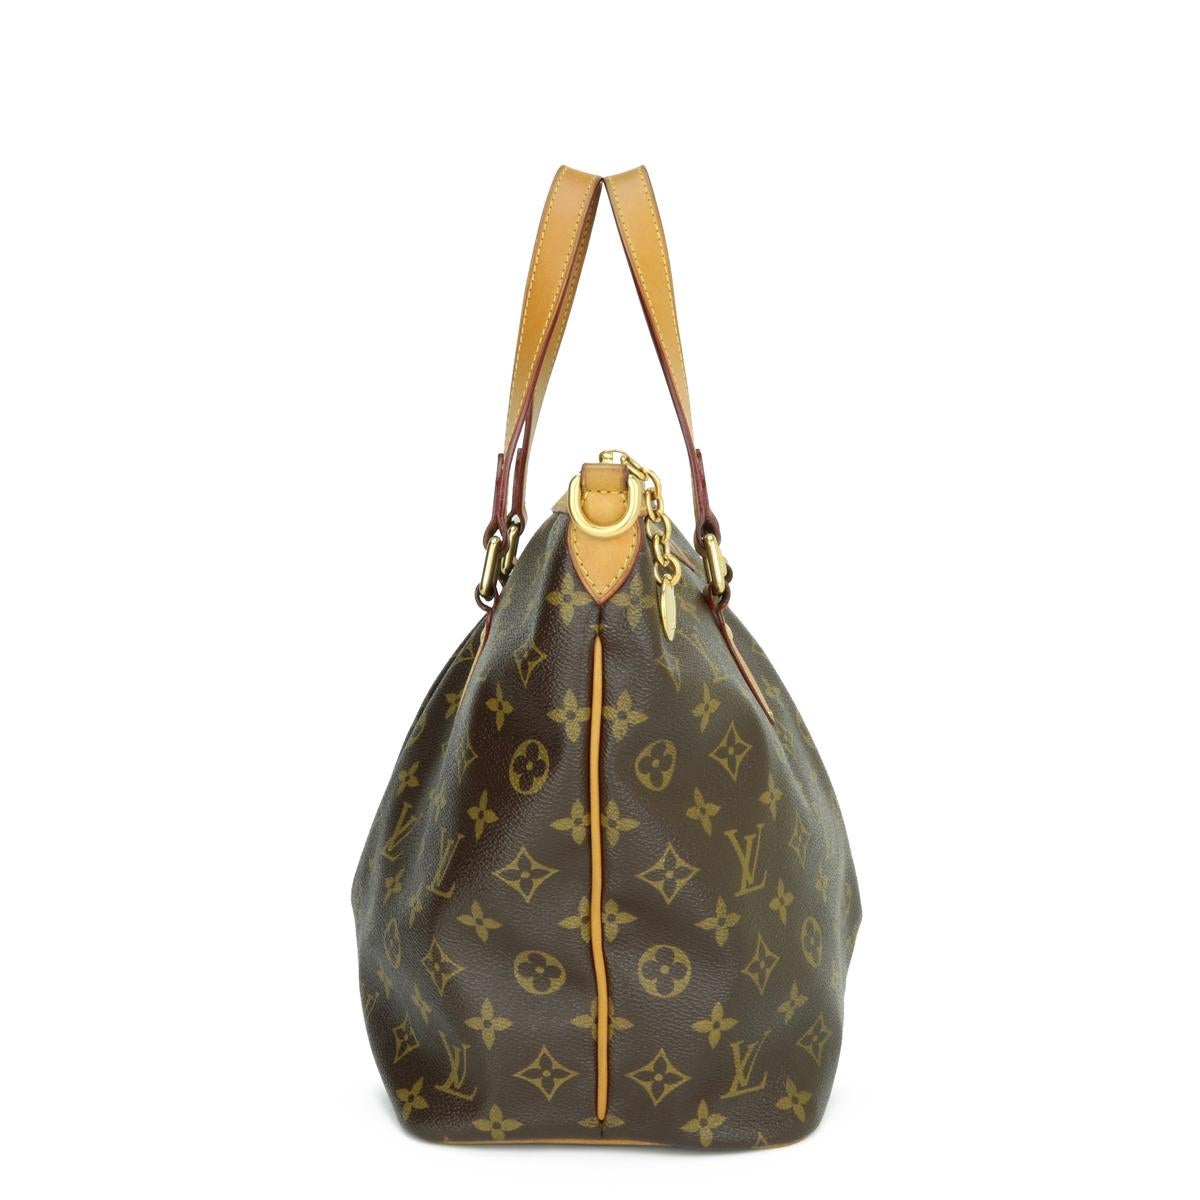 Louis Vuitton Palermo PM Bag in Monogram 2012 In Good Condition For Sale In Huddersfield, GB